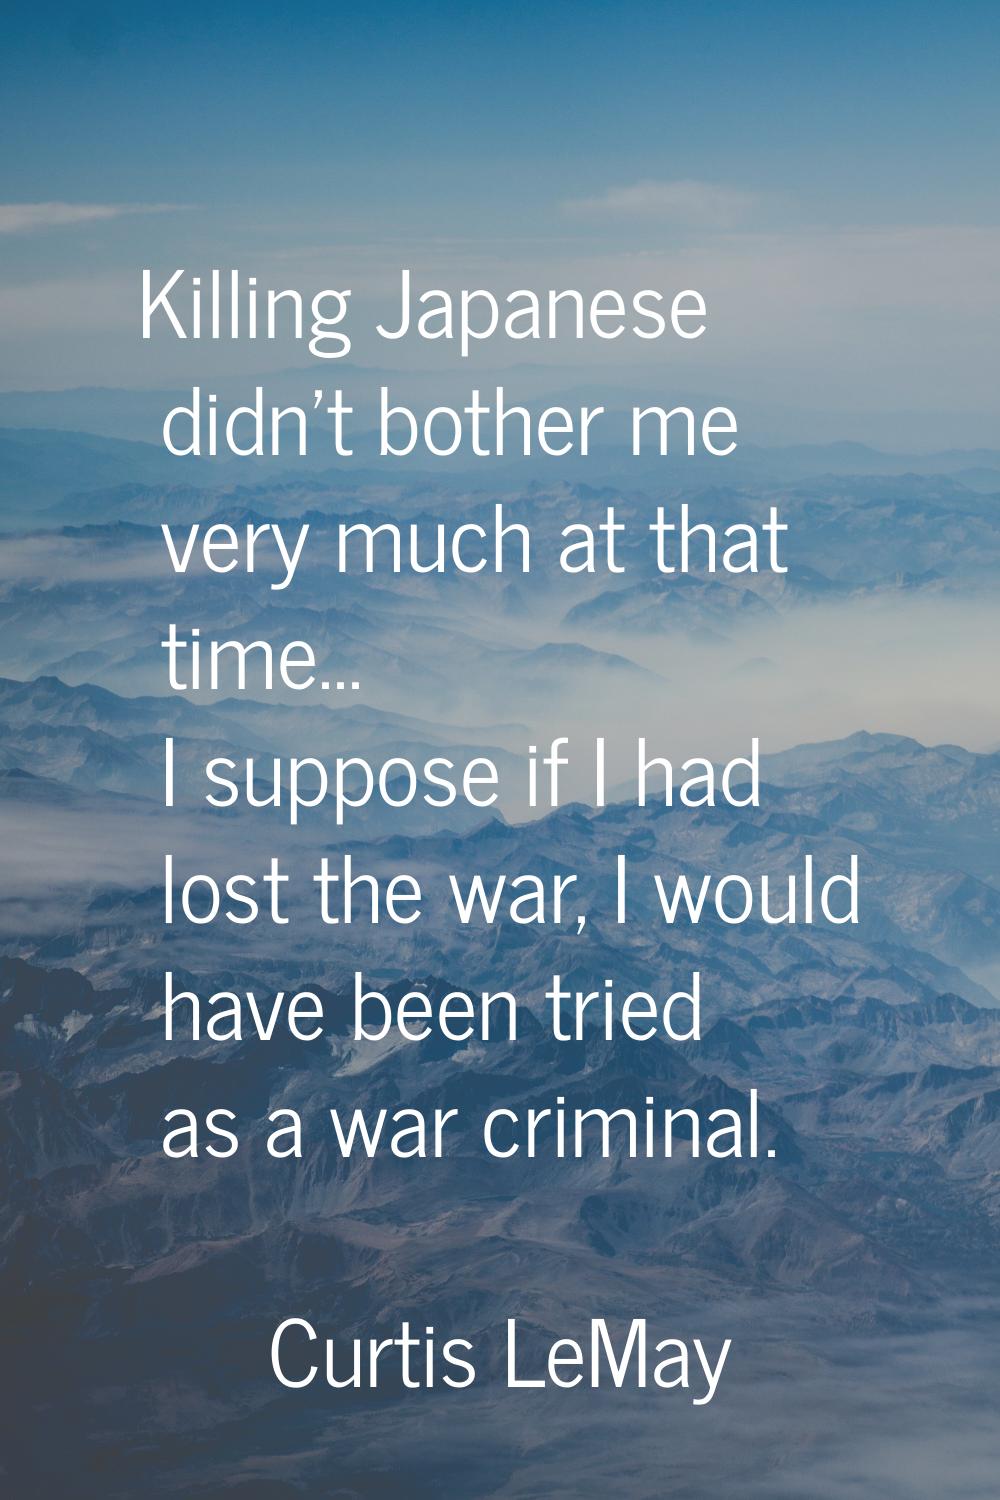 Killing Japanese didn't bother me very much at that time... I suppose if I had lost the war, I woul